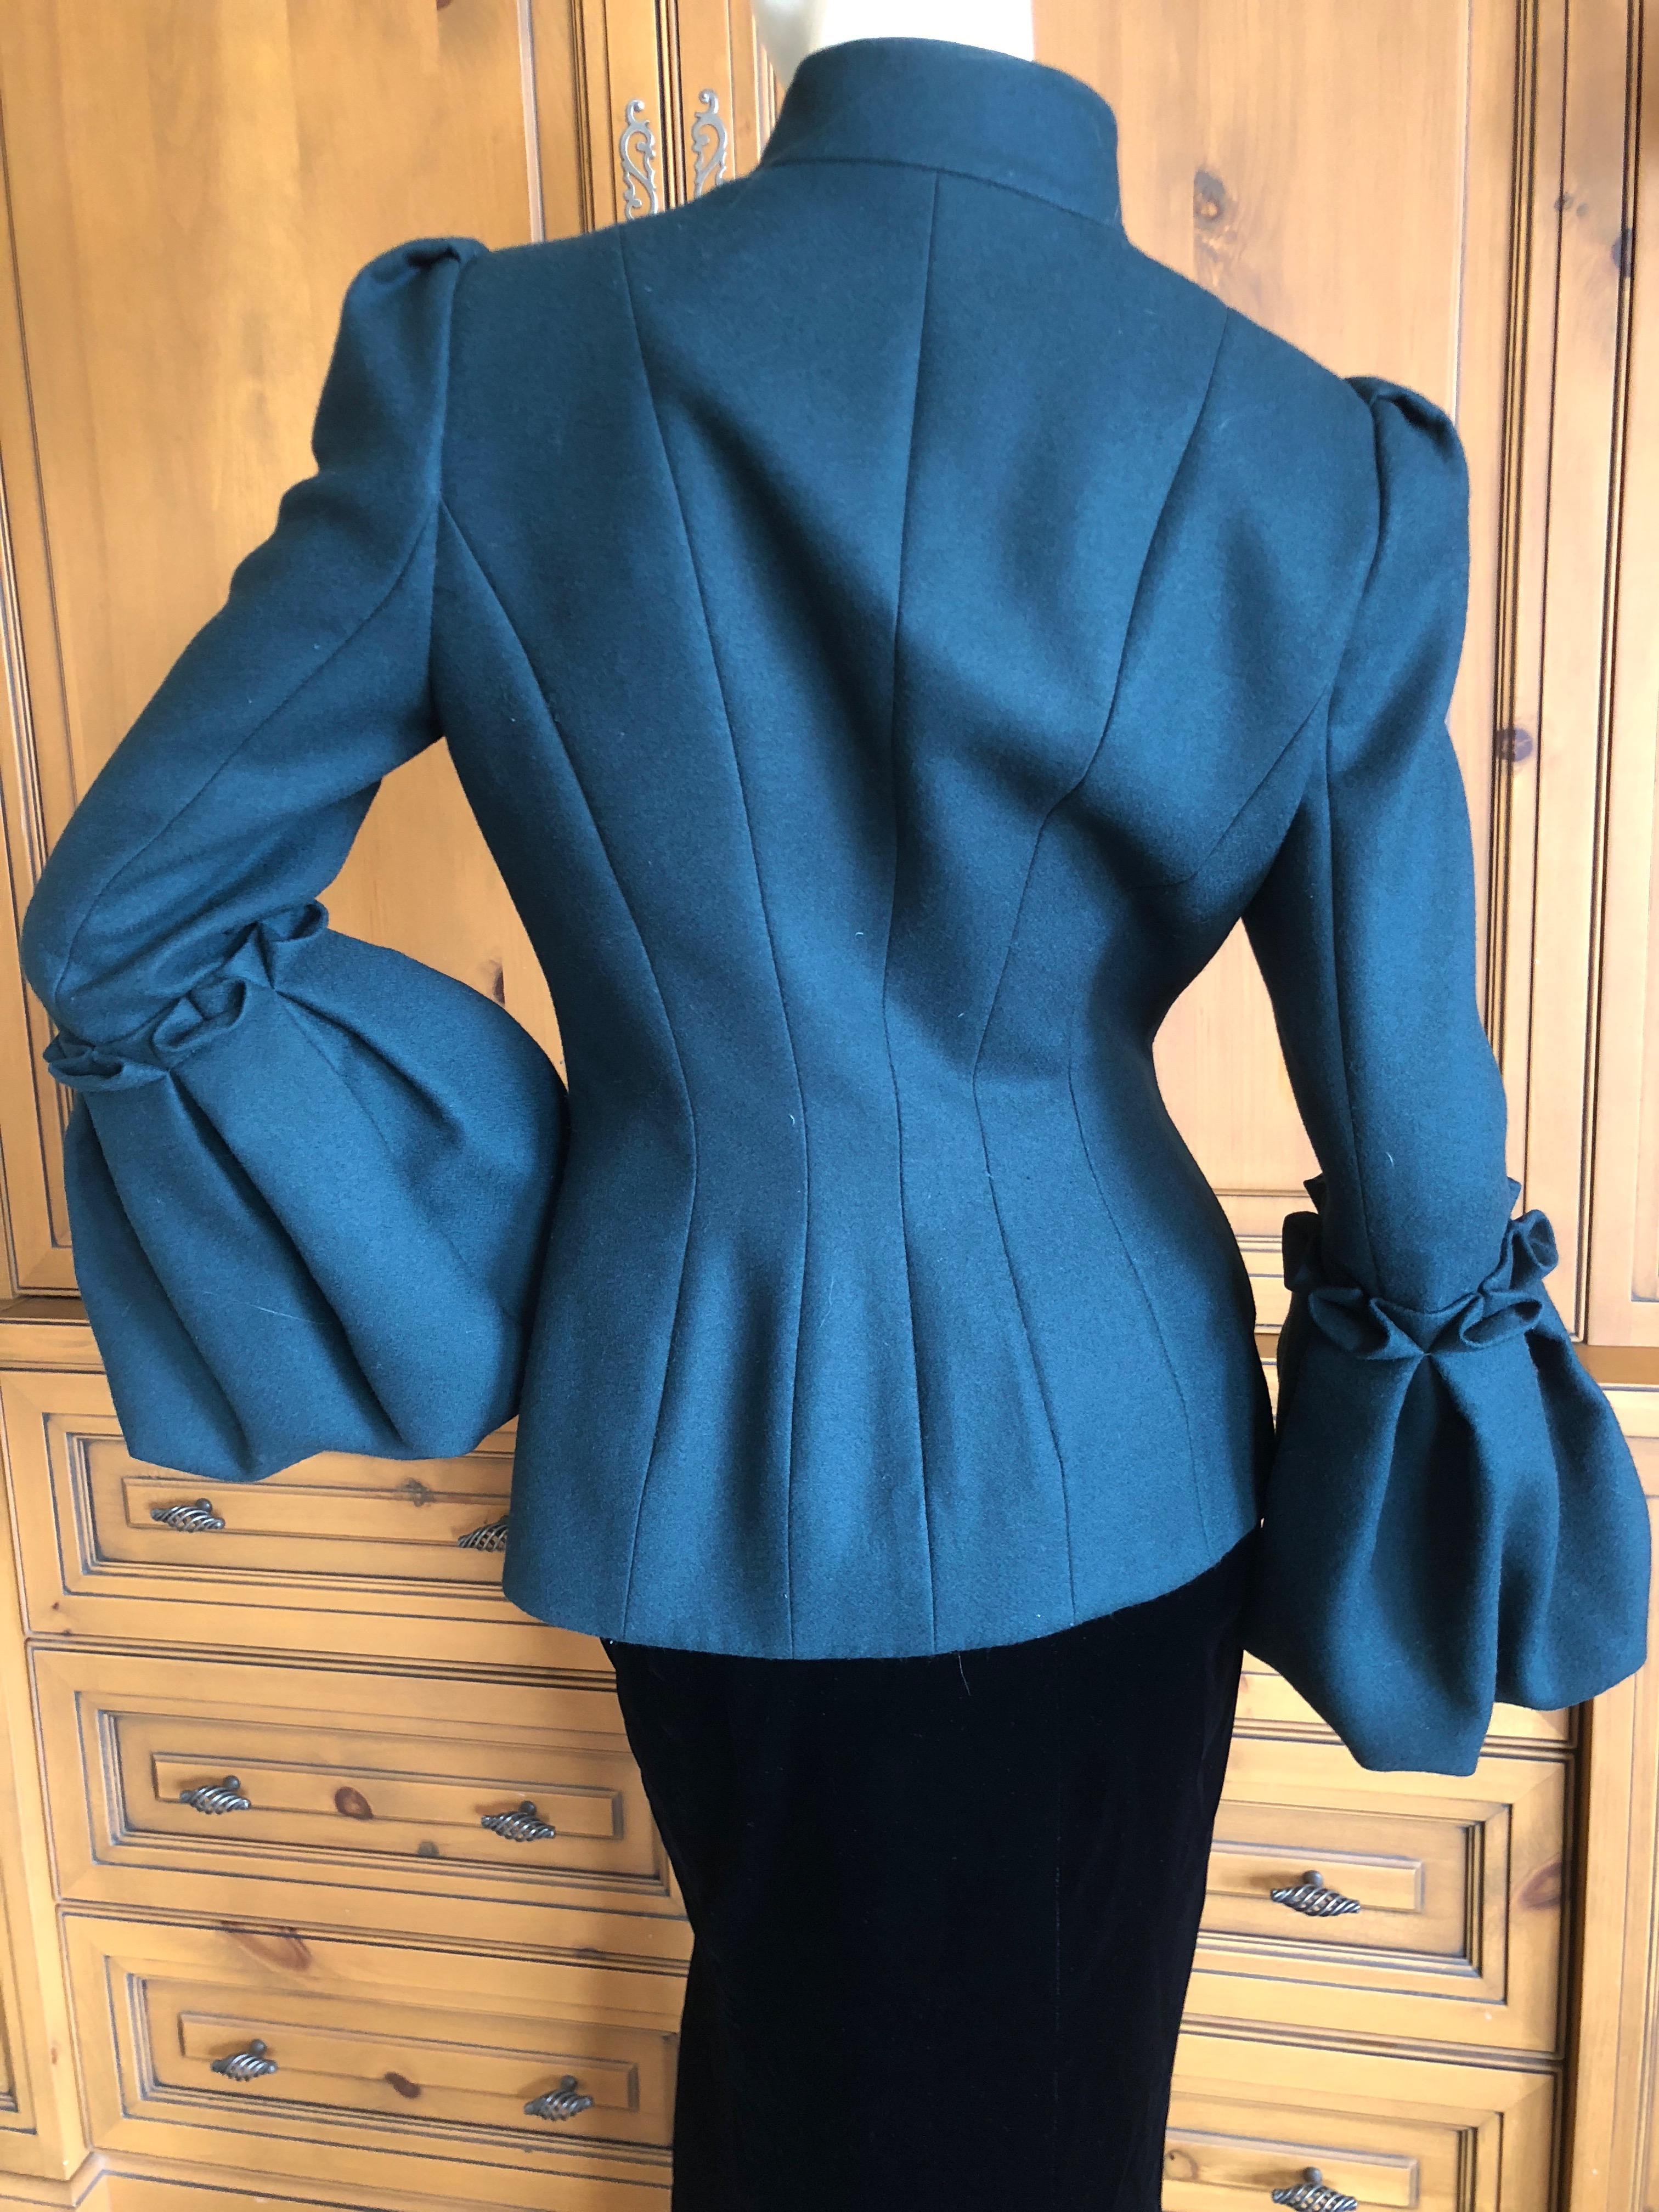 Alexander McQueen Teal Green Wool Jacket with Exaggerated Cuffs Size 42 For Sale 4